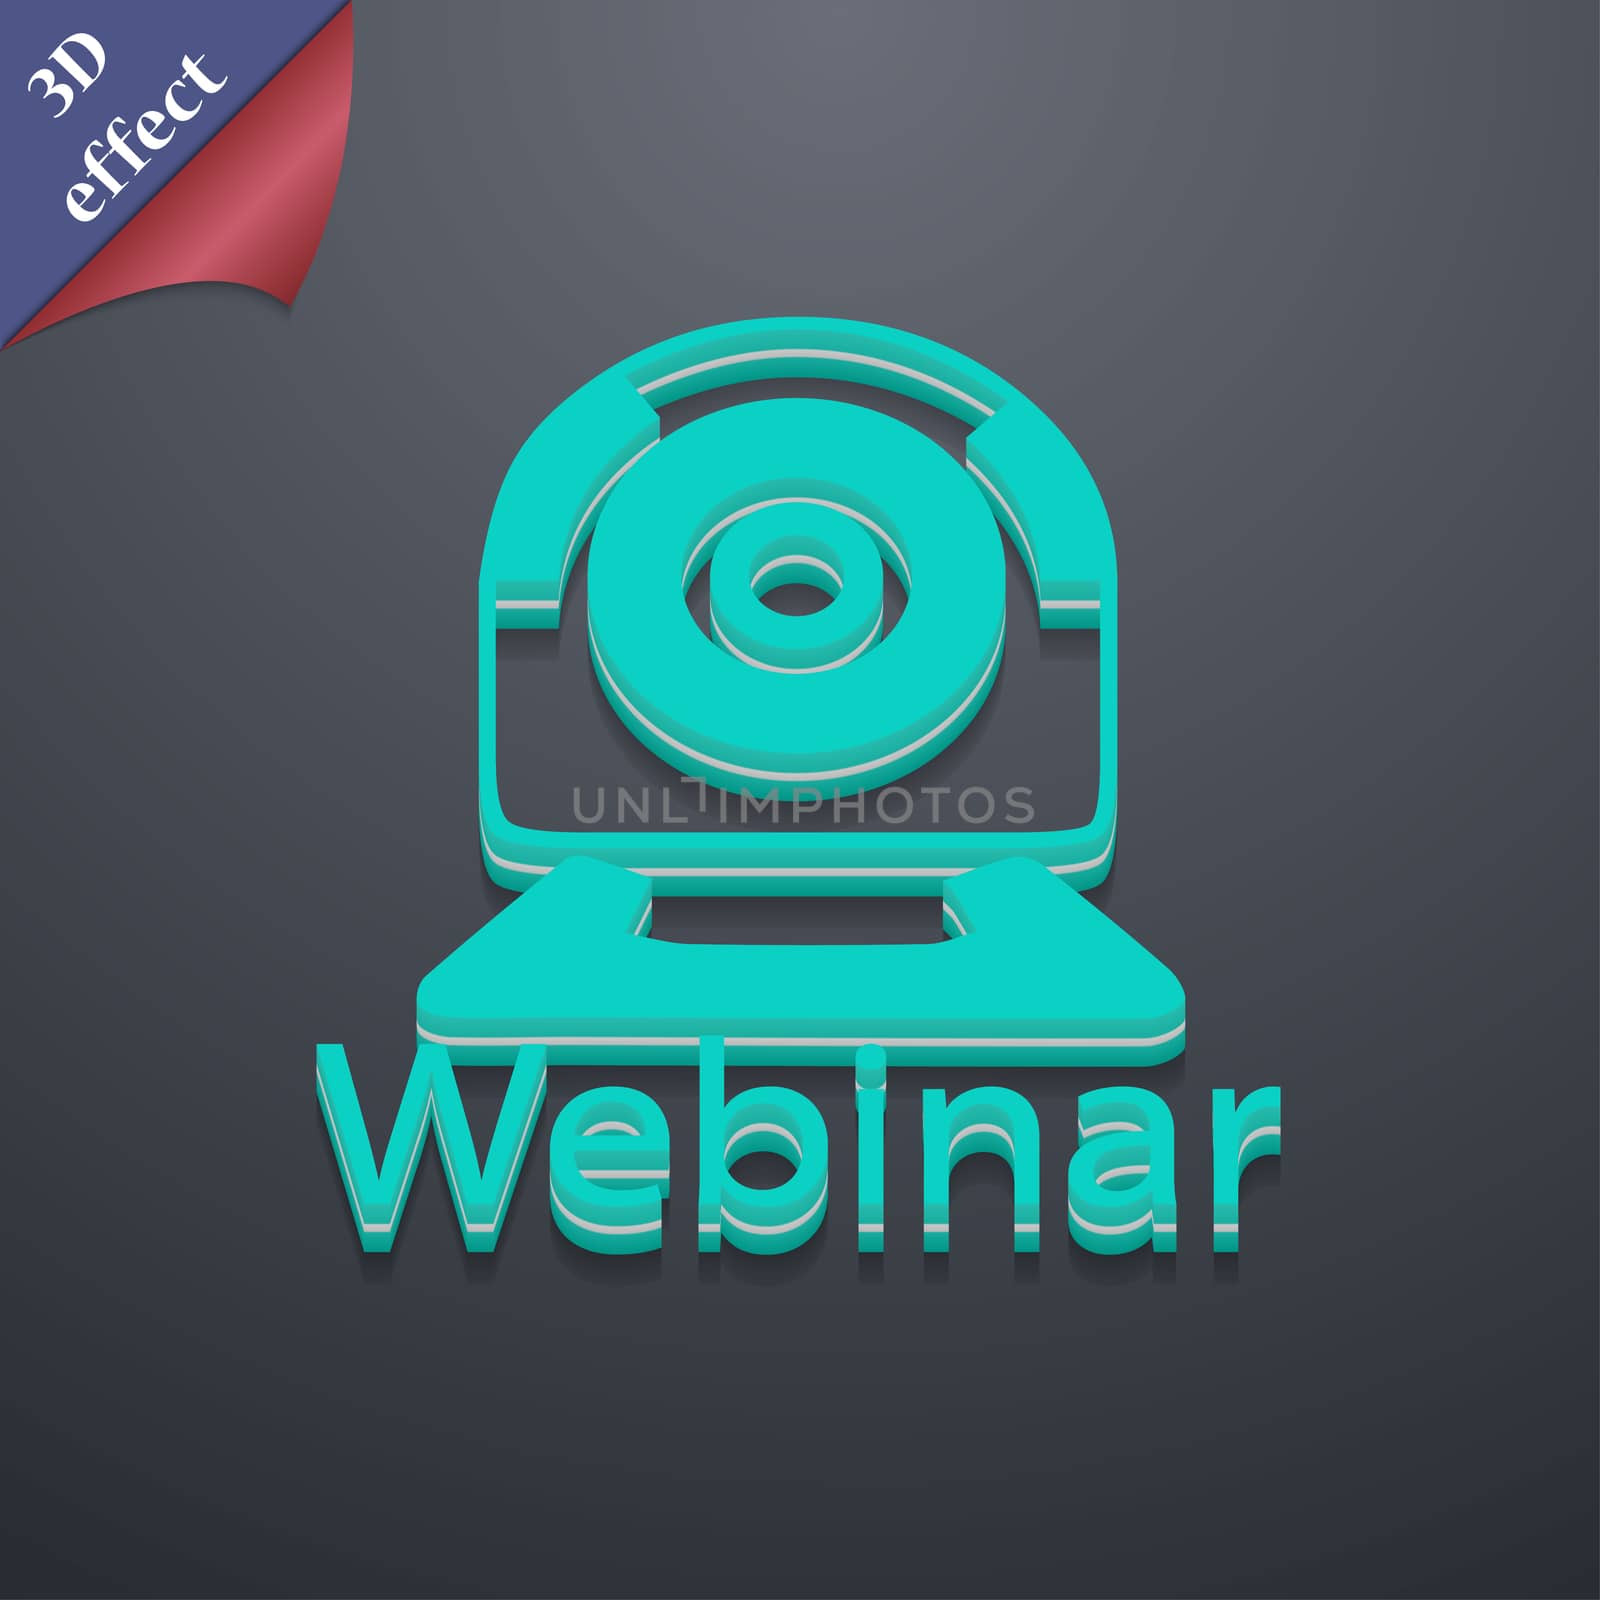 Webinar web camera icon symbol. 3D style. Trendy, modern design with space for your text illustration. Rastrized copy